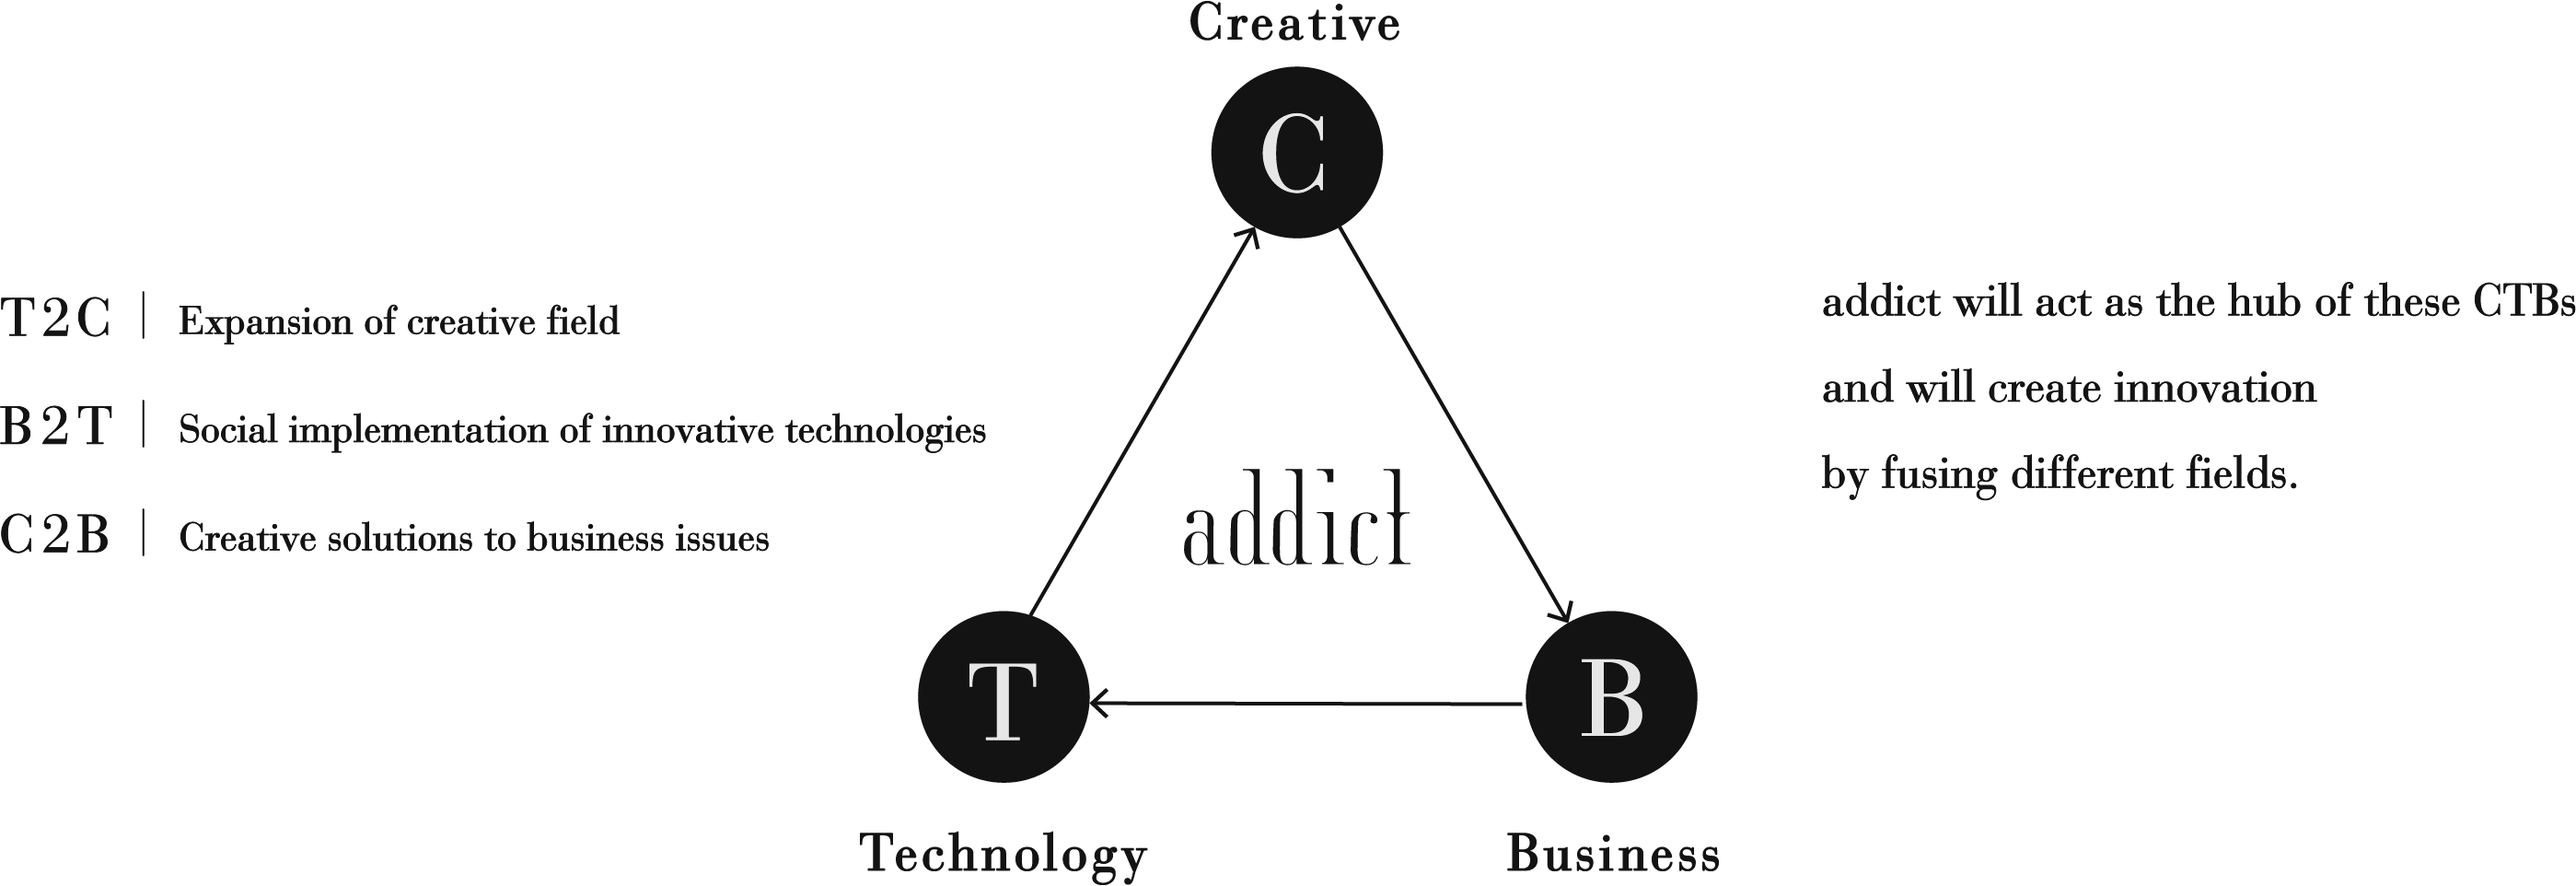 addict will act as the hub of these CTBs and will create innovation by fusing different fields.